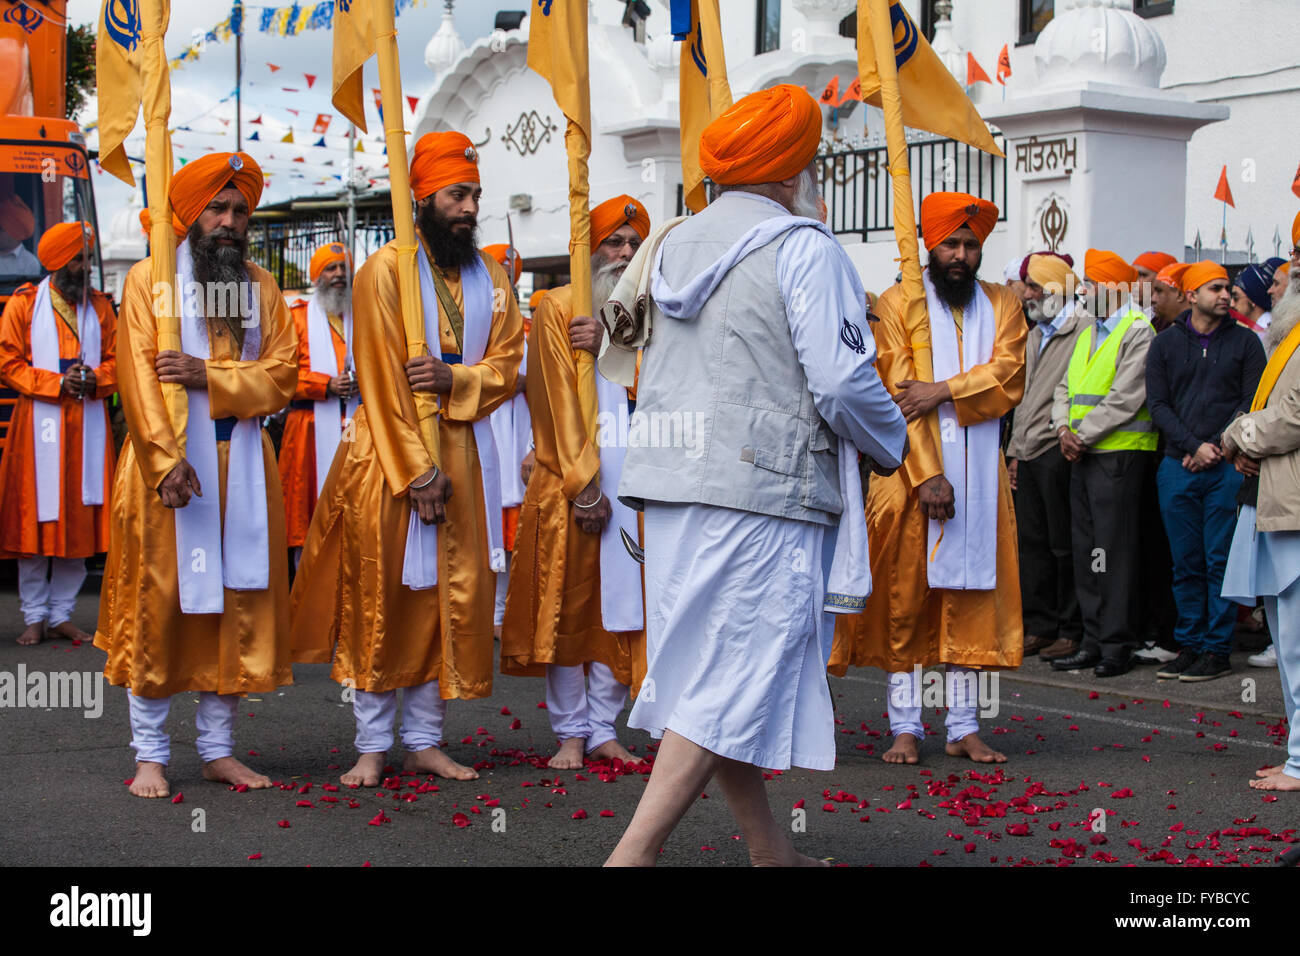 Slough, UK. 24th April 2016. The bearers of the Nishan Sahib and the Panj Pyare (Five Beloved Ones) begin the Vaisakhi Nagar Kirtan procession from the Gurdwara Sri Guru Singh Sabha. Vaisakhi is the holiest day in the Sikh calendar, a harvest festival marking the creation of the community of initiated Sikhs known as the Khalsa. Credit:  Mark Kerrison/Alamy Live News Stock Photo